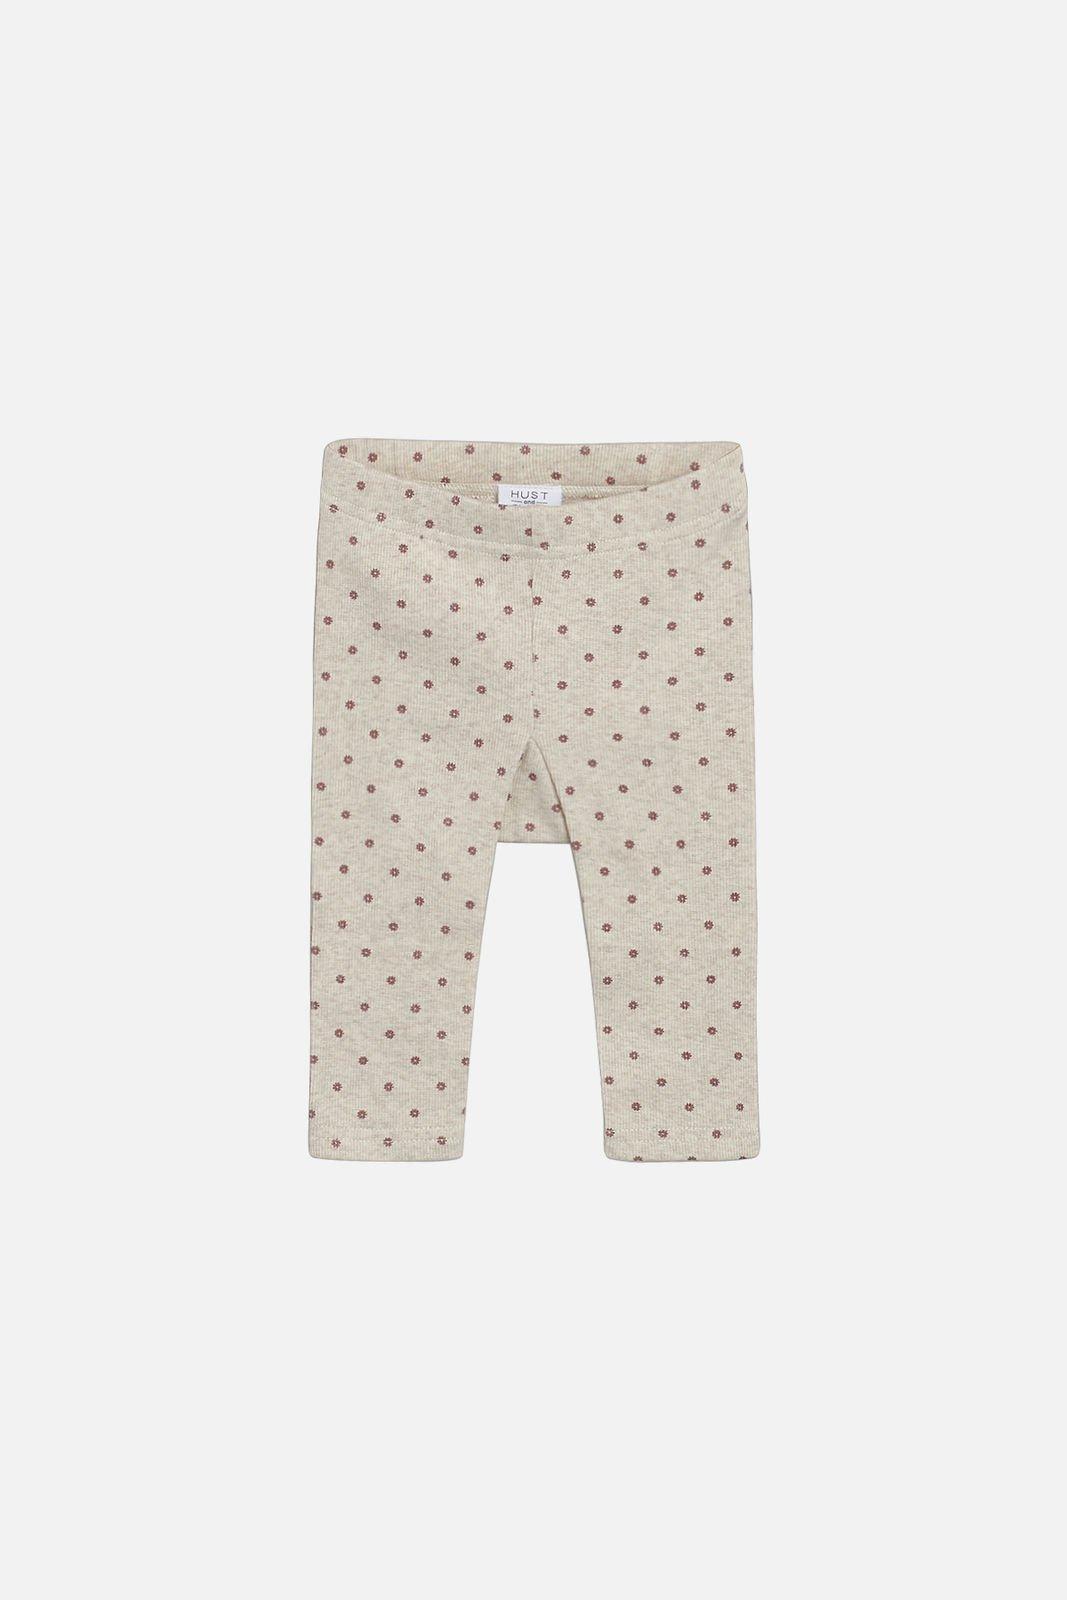 Image of Hust and Claire Baby Leggings Lara - 62